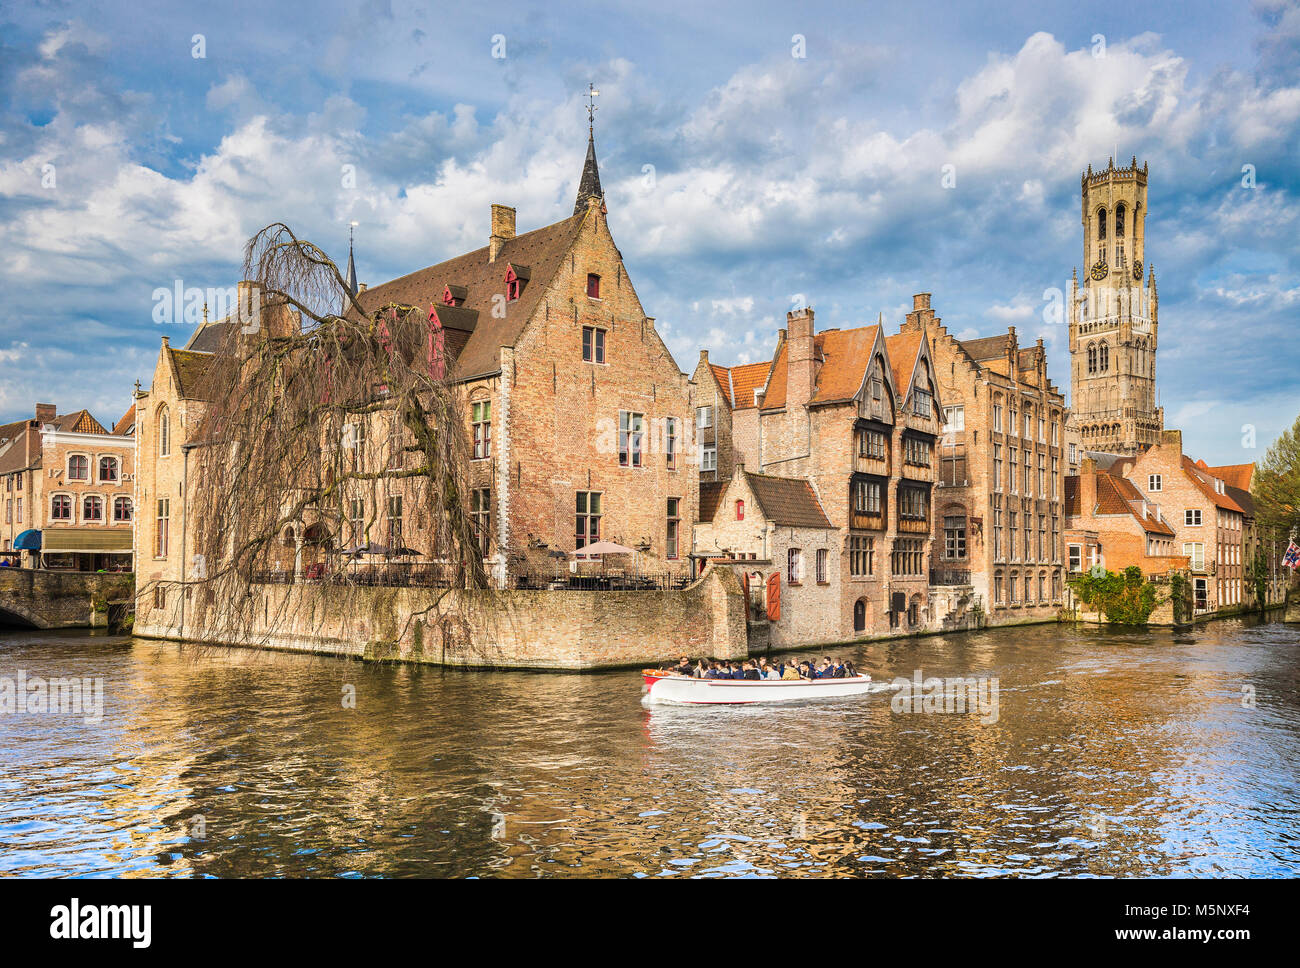 Historic city center of Brugge, often referred to as The Venice of the North, with tourists taking a boat ride on a sunny day, Flanders, Belgium Stock Photo